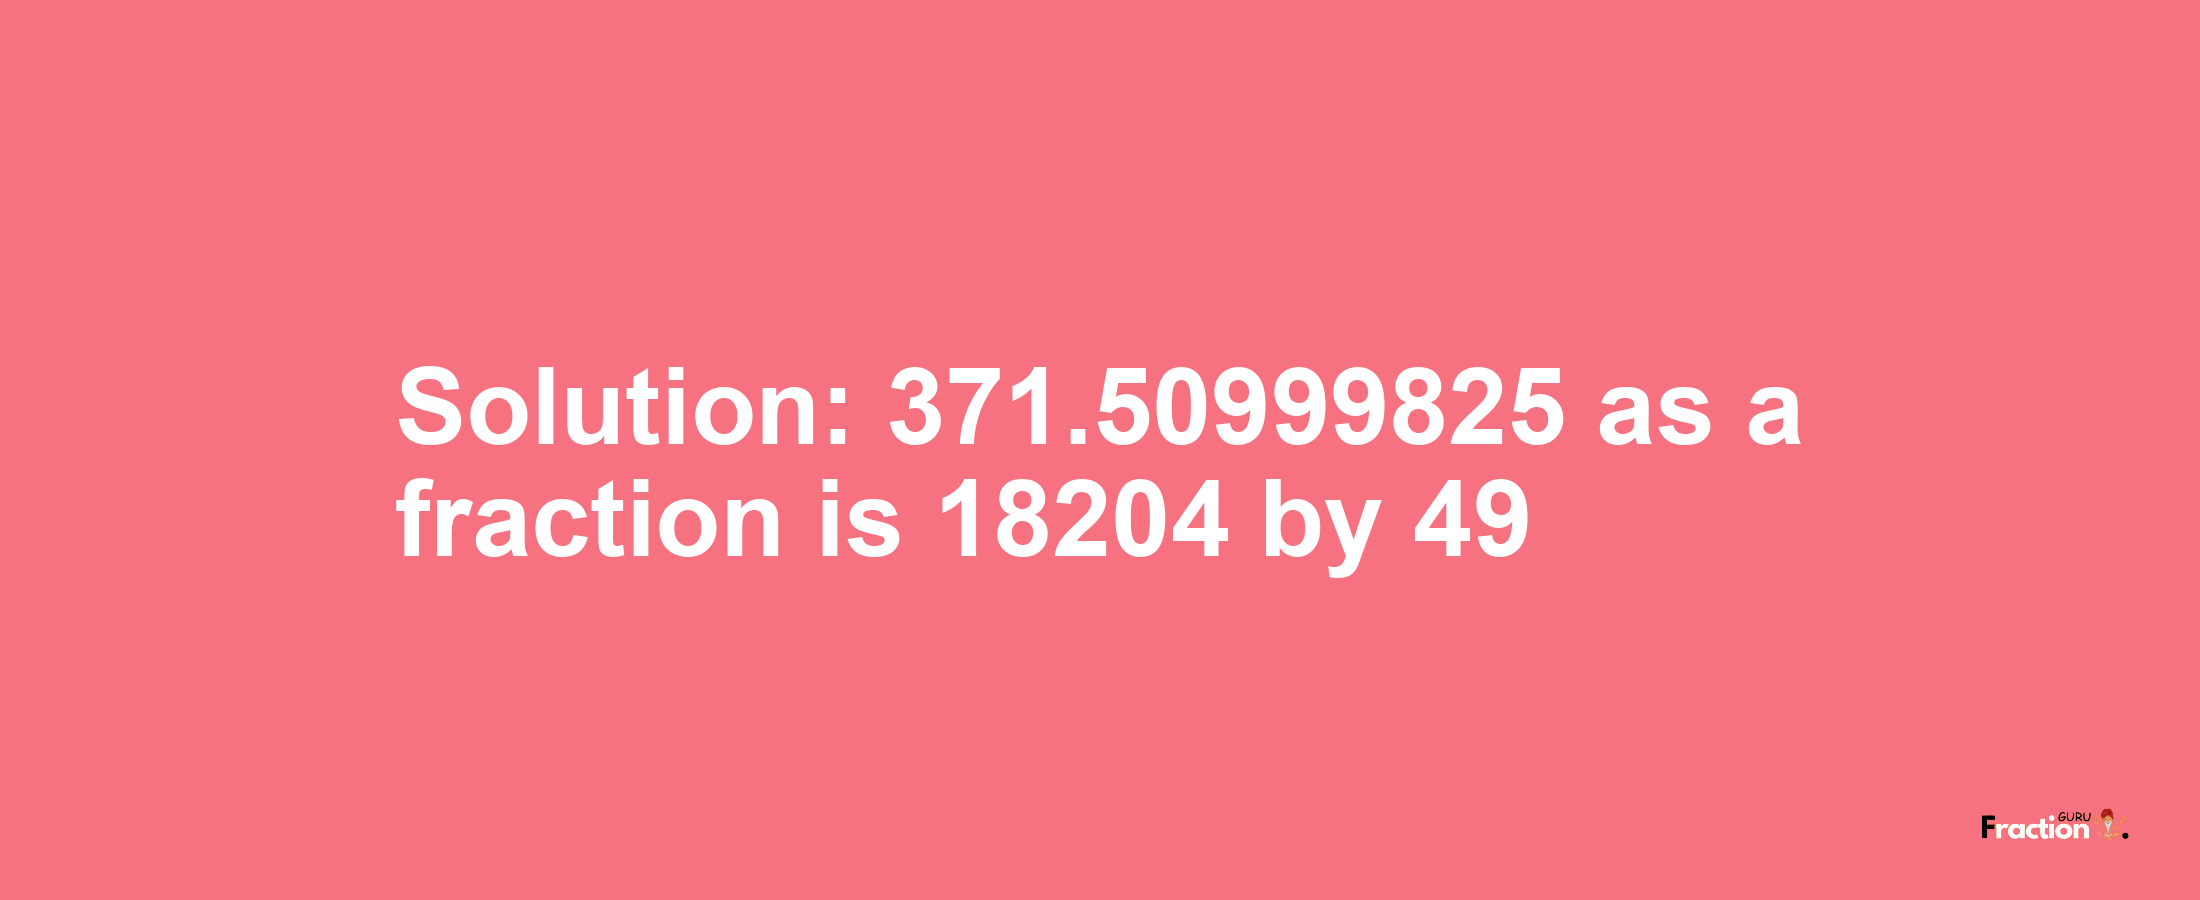 Solution:371.50999825 as a fraction is 18204/49